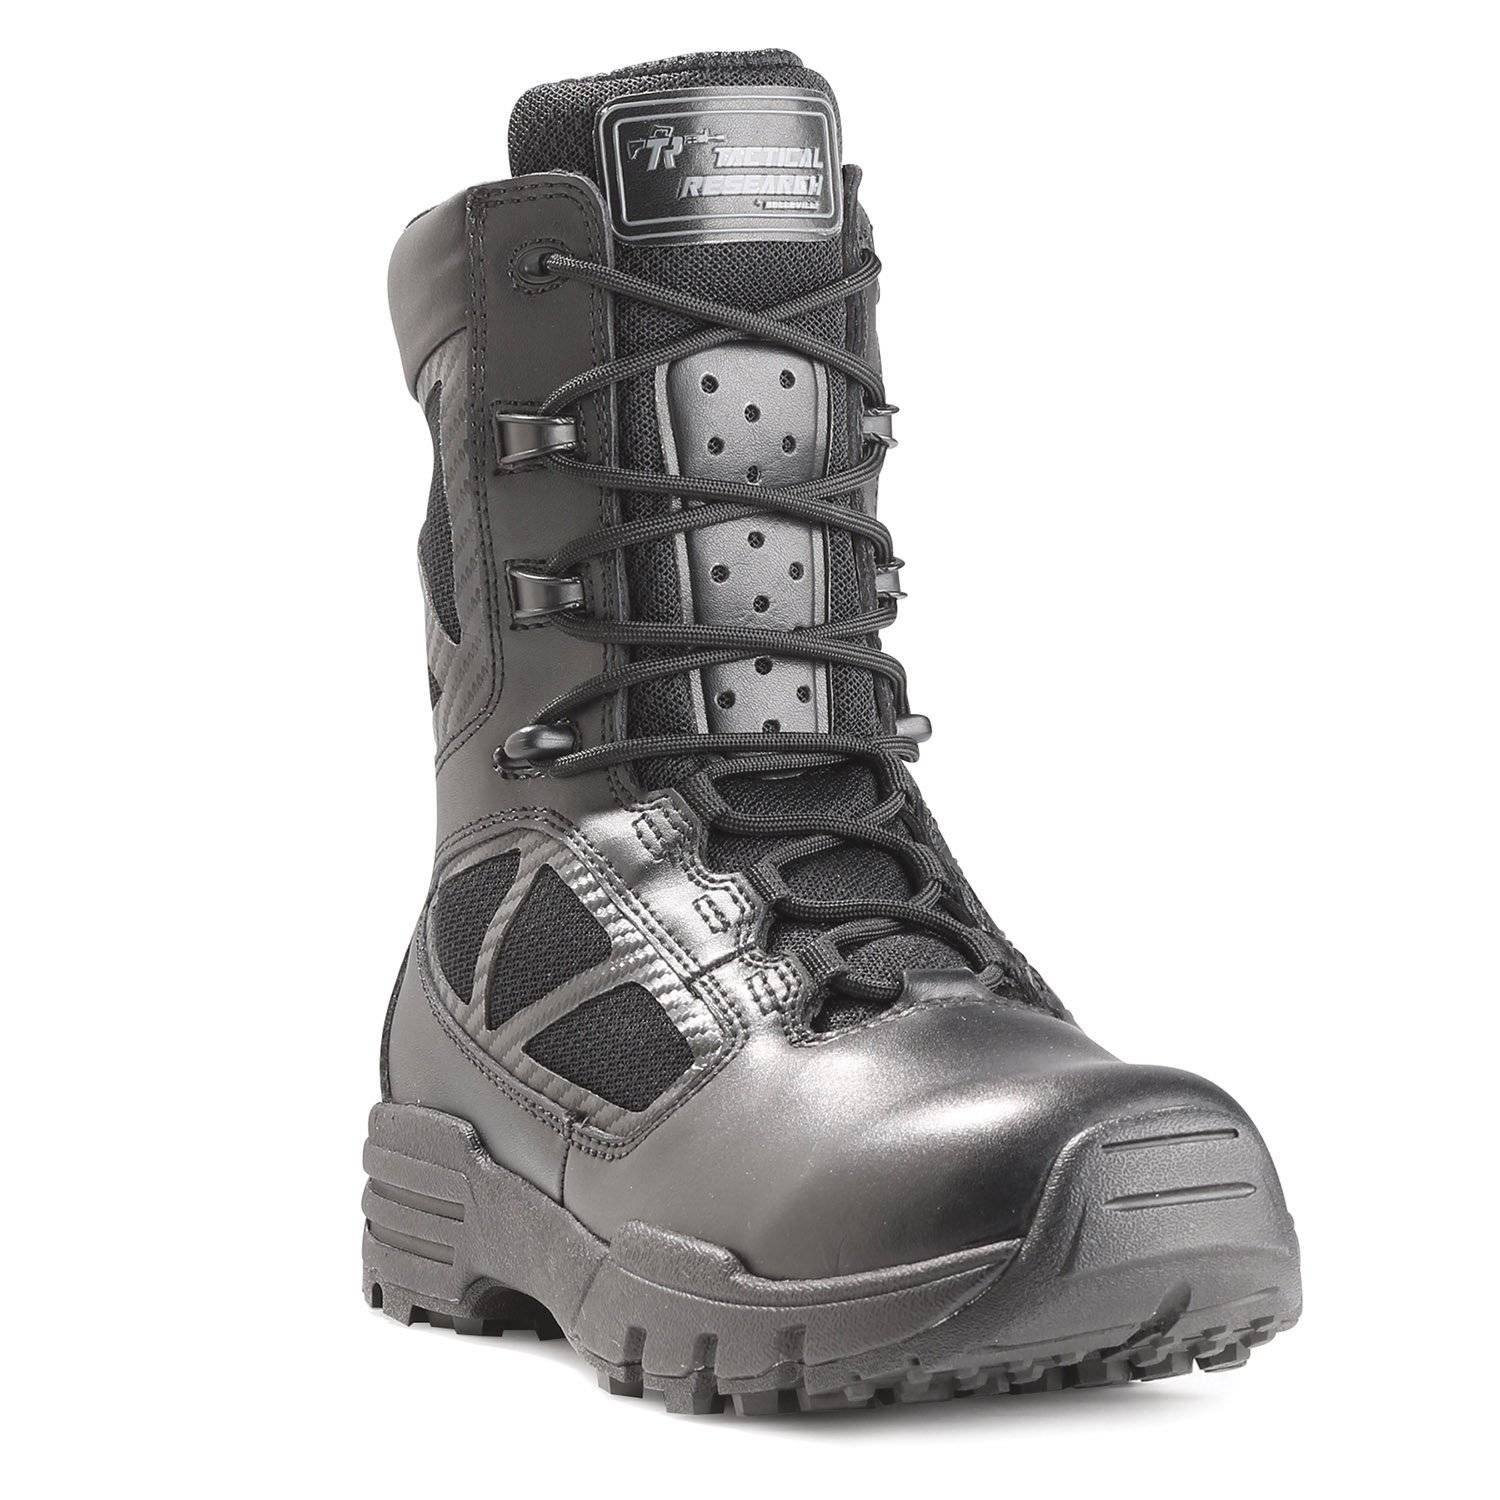 Tactical Research 8" Chrome Side Zip Boot